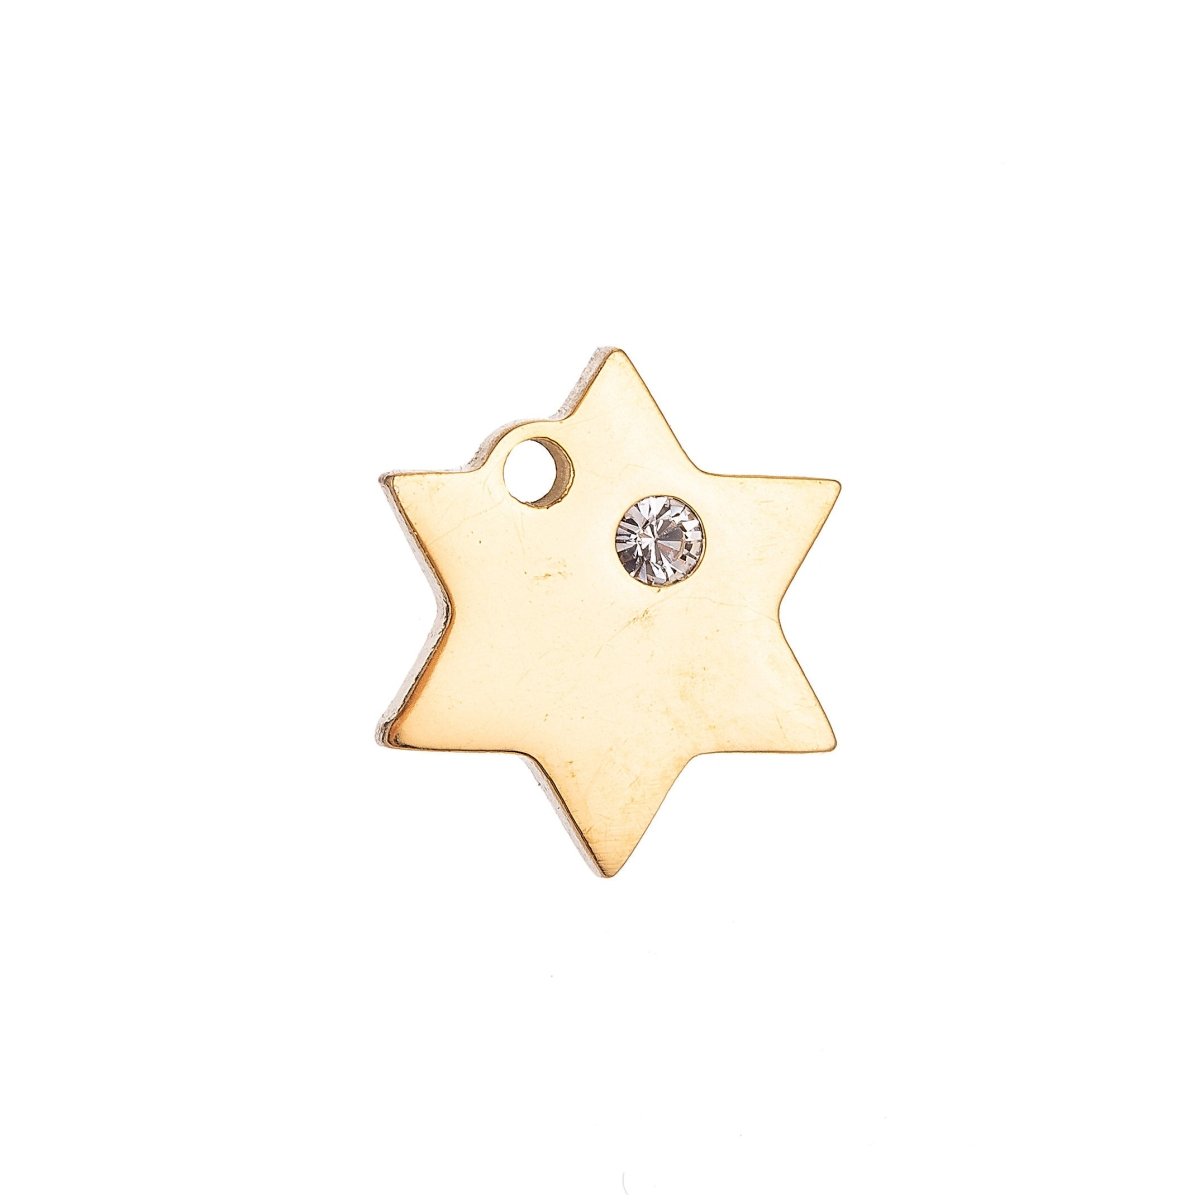 Star Pendant Personalized Stamping Blank Star Initial Charm 18k Gold Filled Stainless Steel Jewelry Supply Craft Wholesale Supplies E-629 - DLUXCA